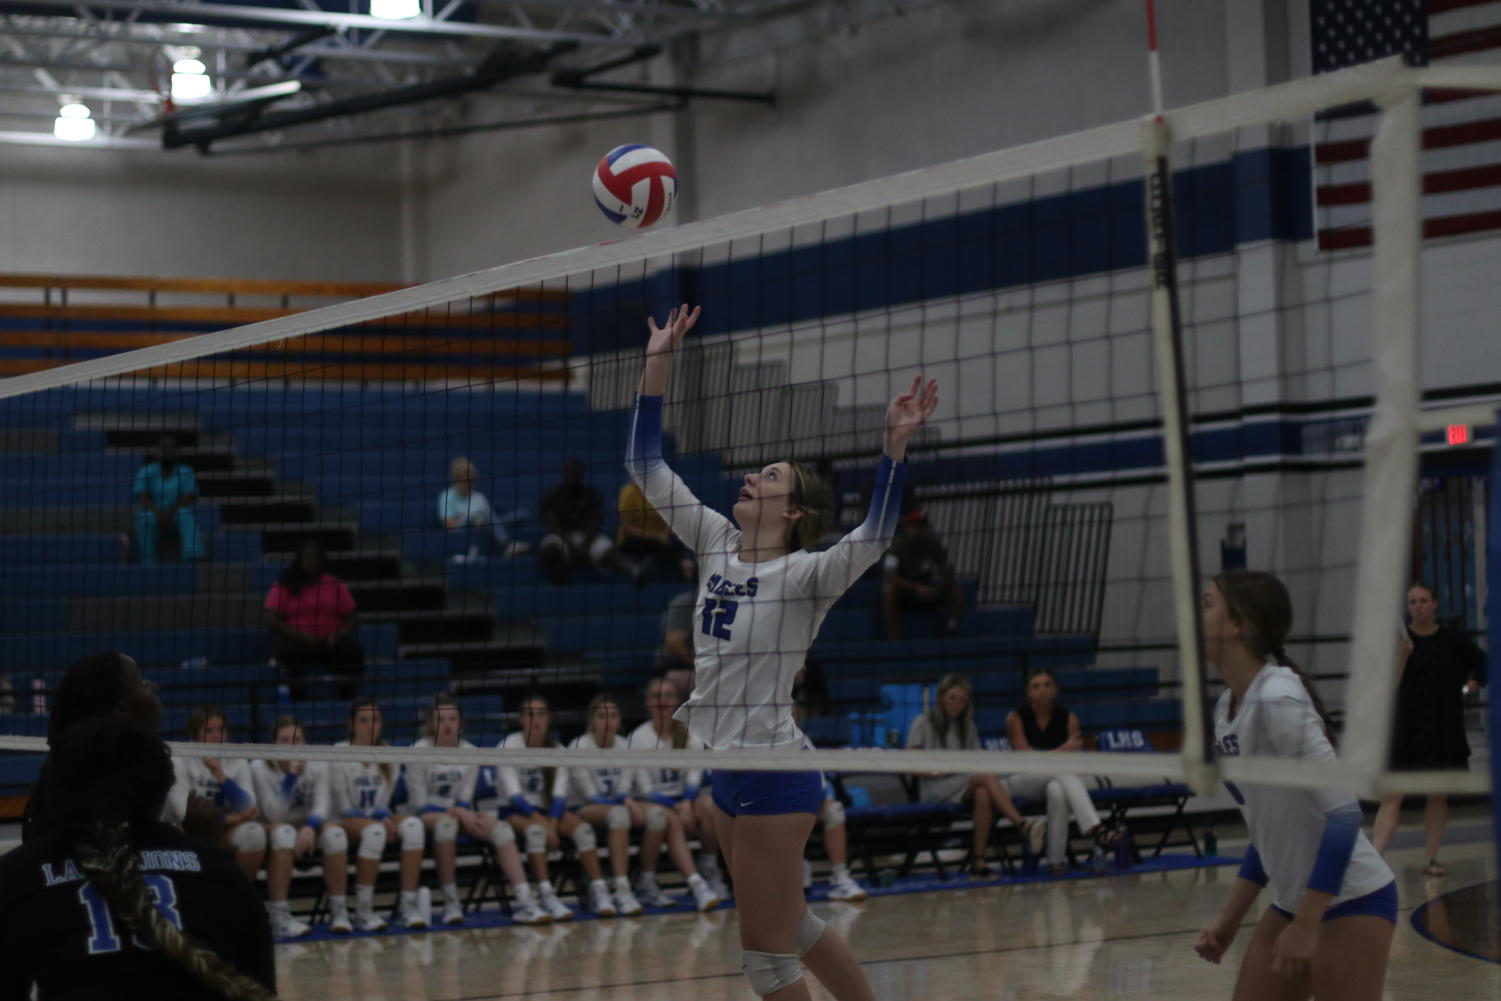 Senior Brenly Philen spikes the ball over the net while playing against the Tyler Lions.